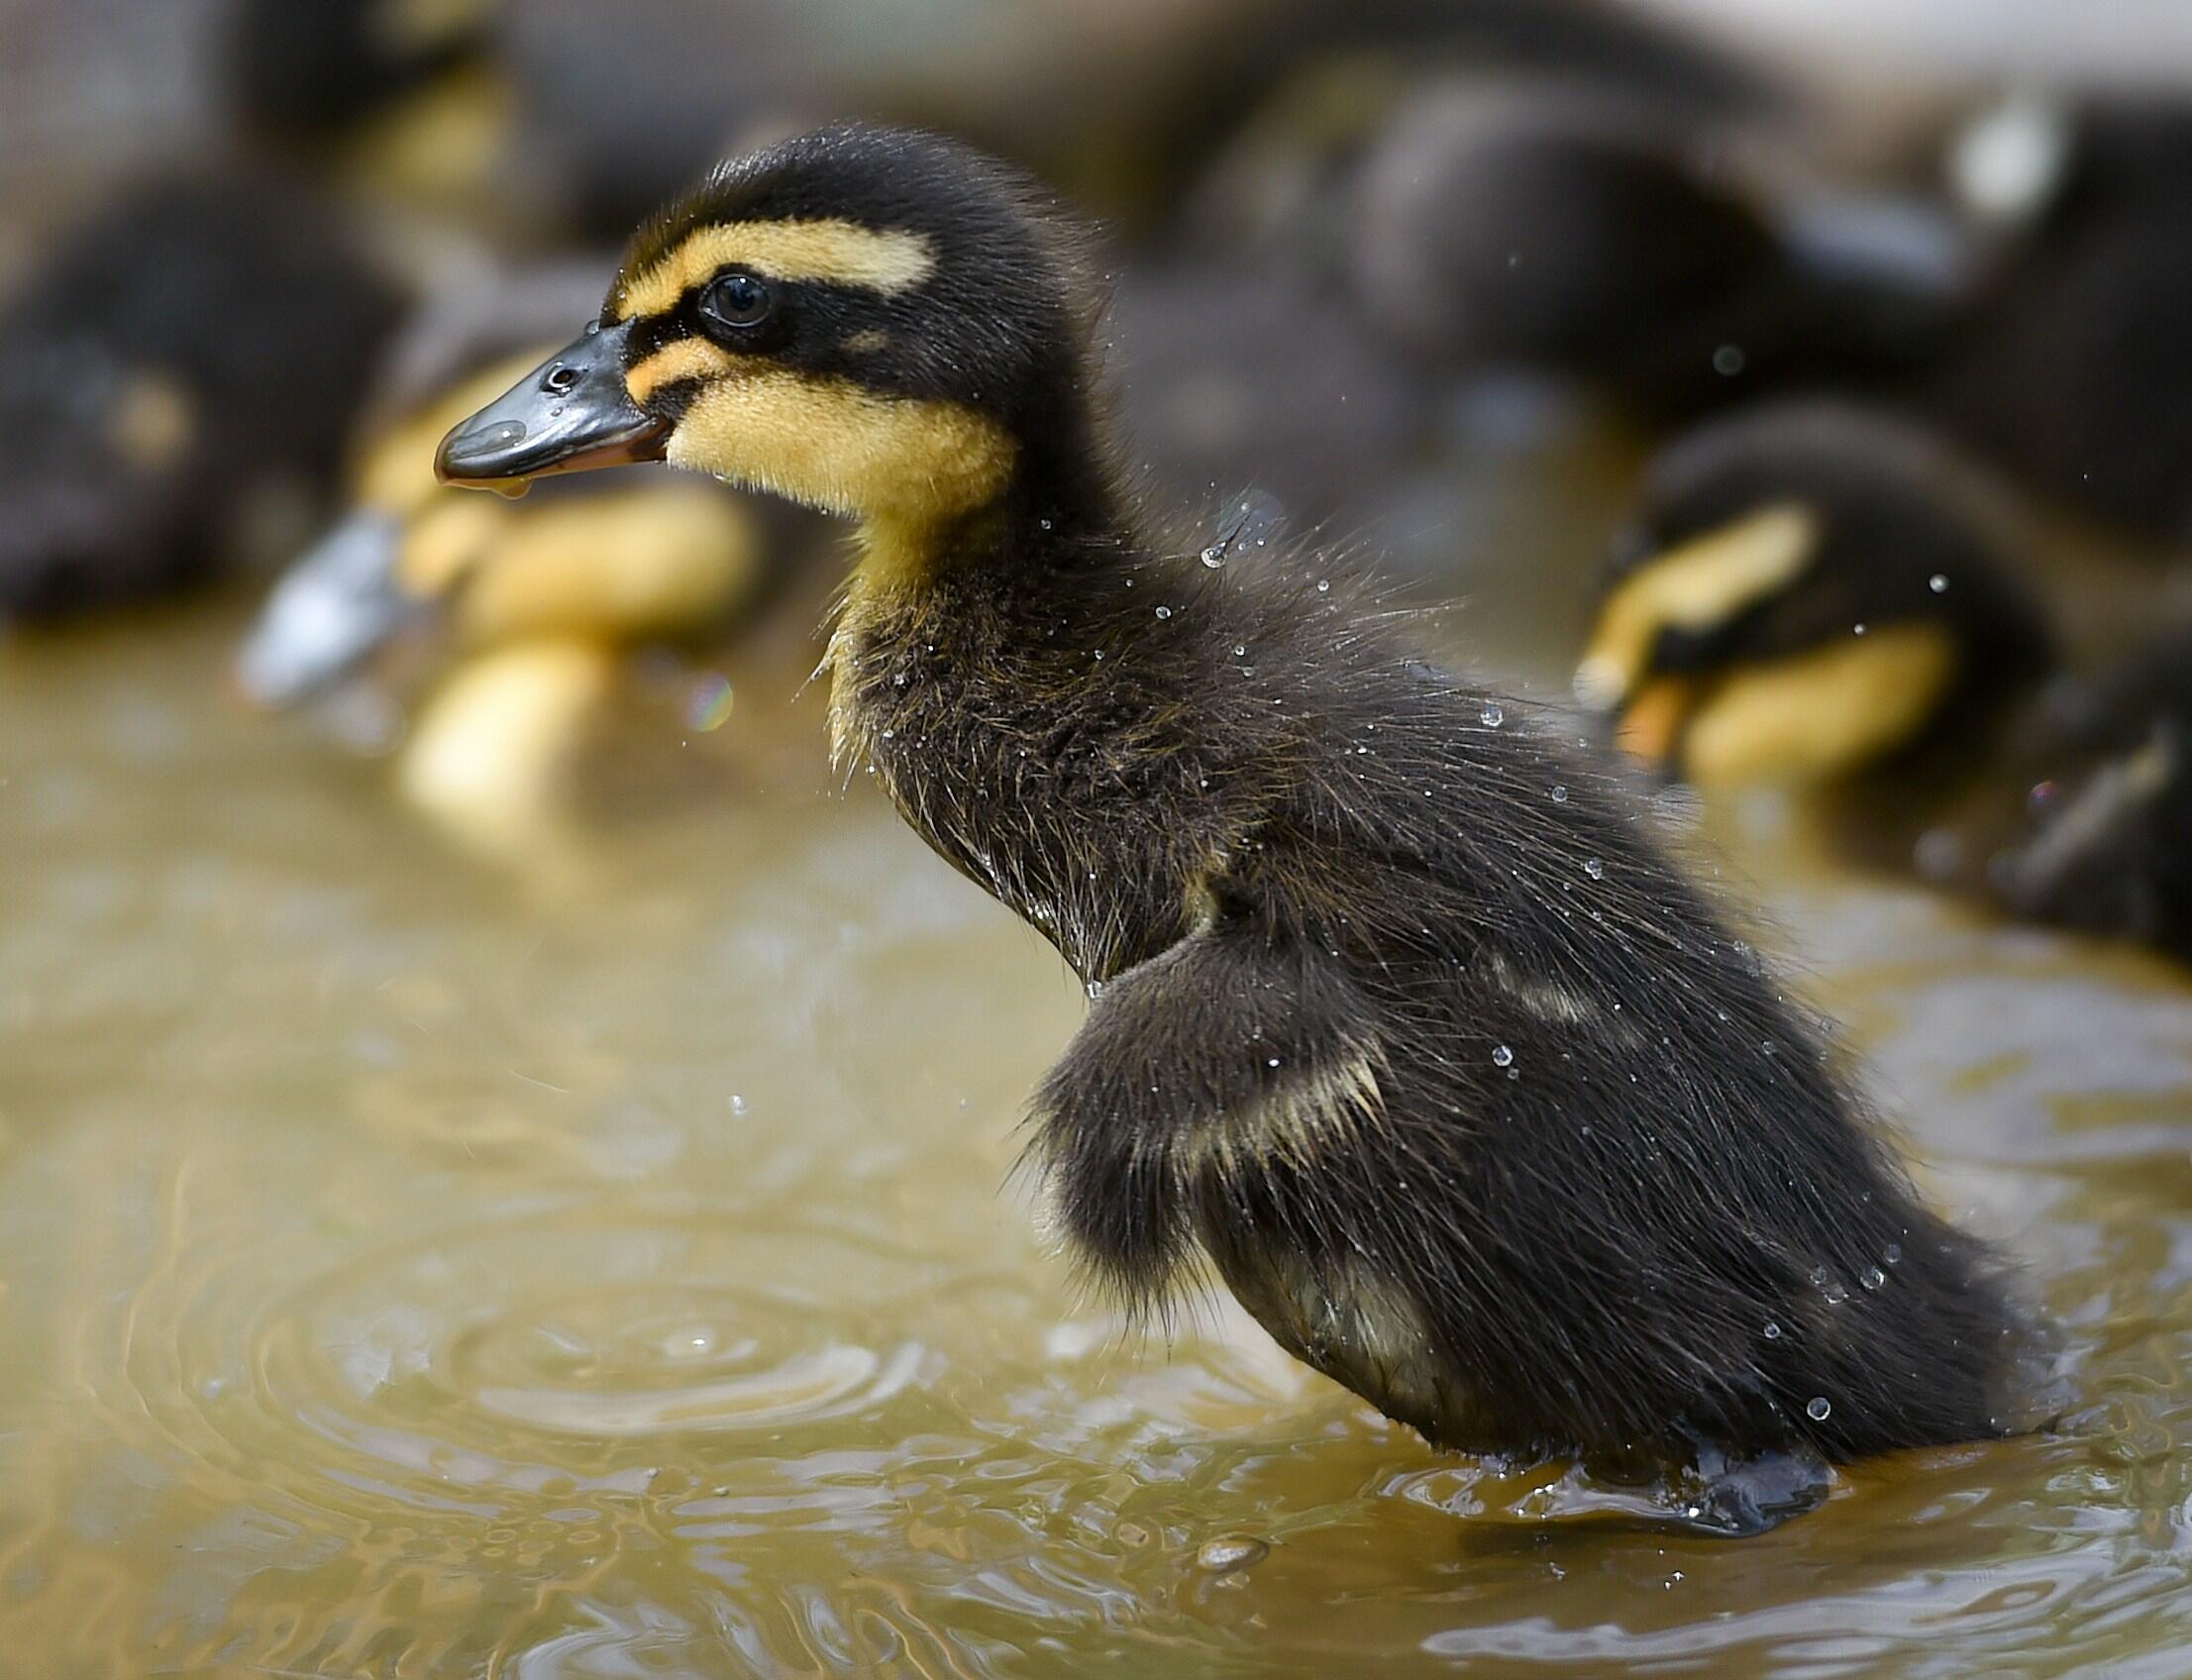 A duckling stands in the water of a garden in Sieversdorf, eastern Germany on May 14, 2014. The fourteen ducklings are ten days old and explore the area.   AFP PHOTO / DPA / PATRICK PLEUL   +++GERMANY OUT+++        (Photo credit should read PATRICK PLEUL/